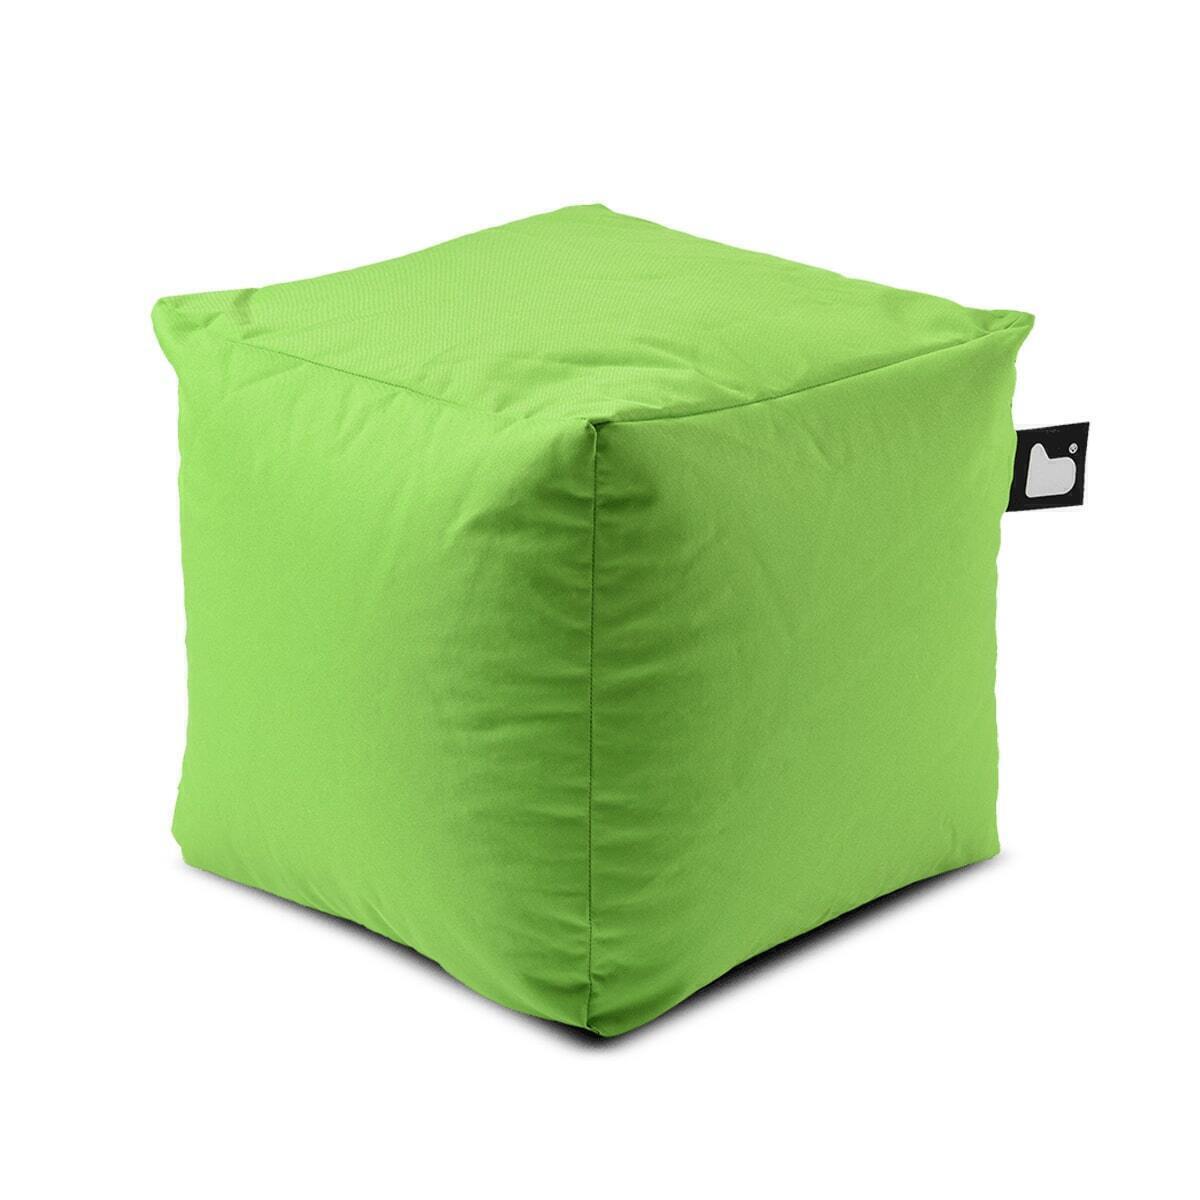 Extreme Lounging - Outdoor Bean Box  - Lime product image